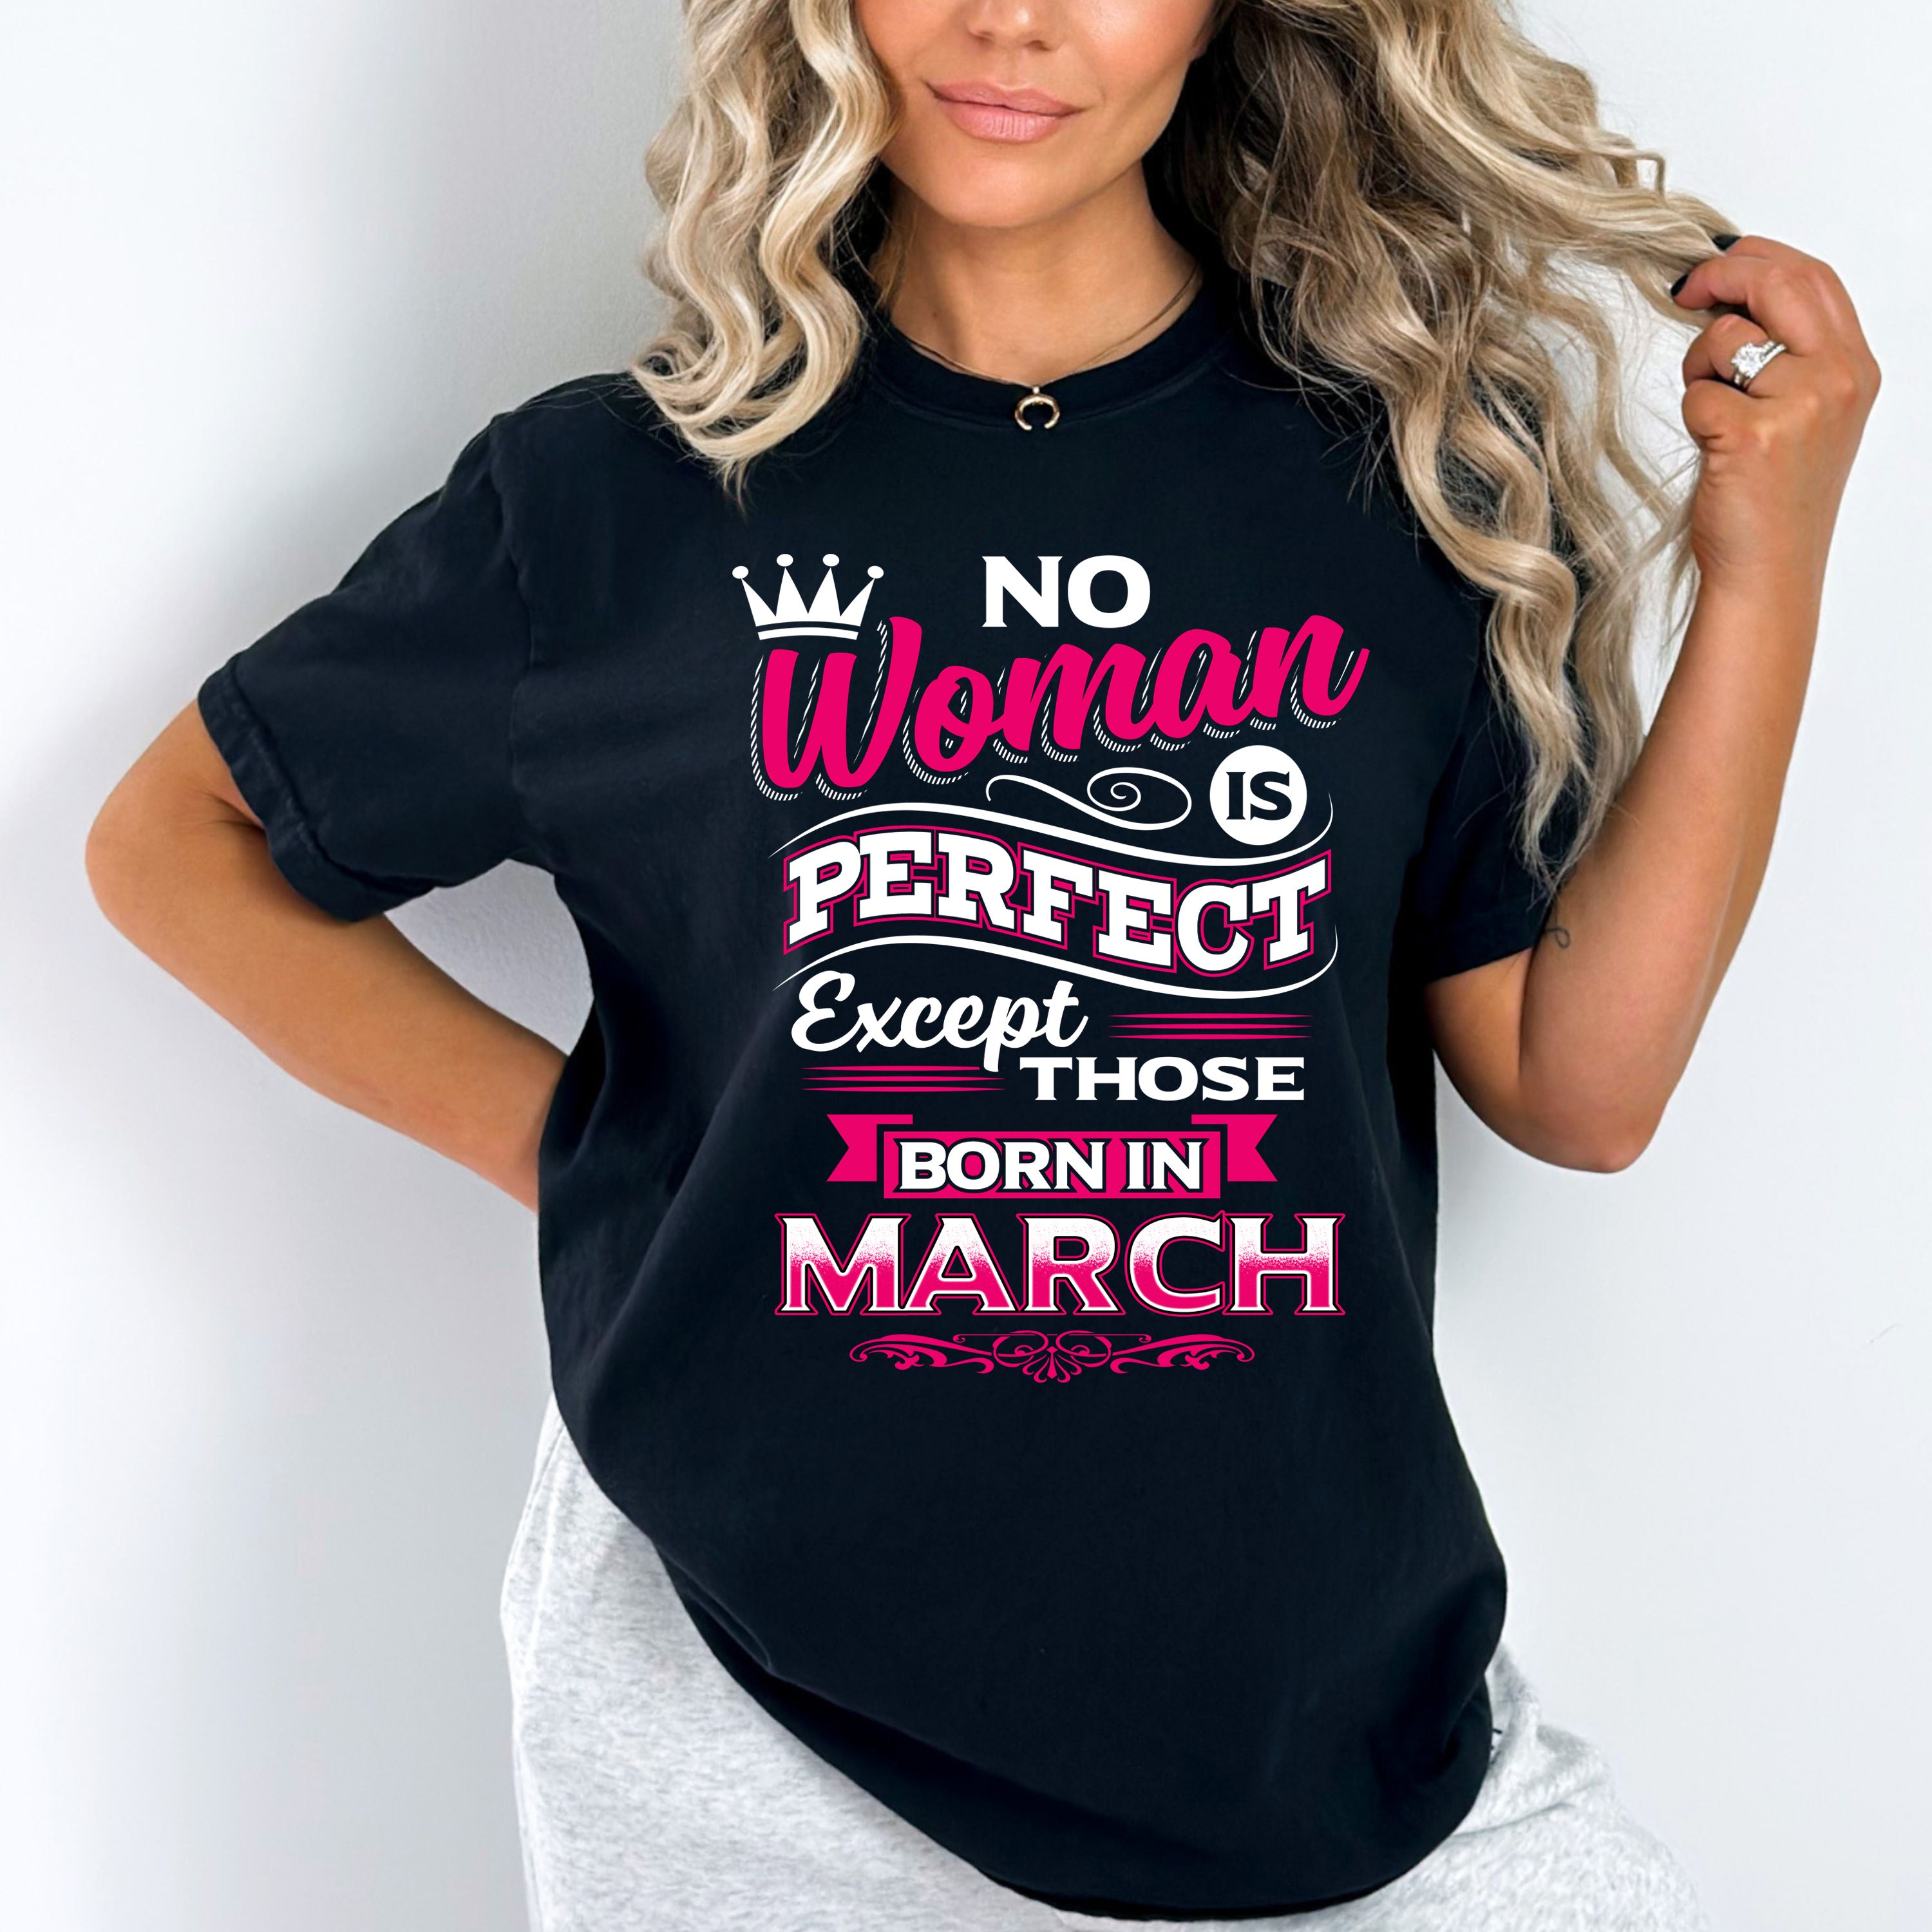 "No Woman Is Perfect Except Those Born In March"